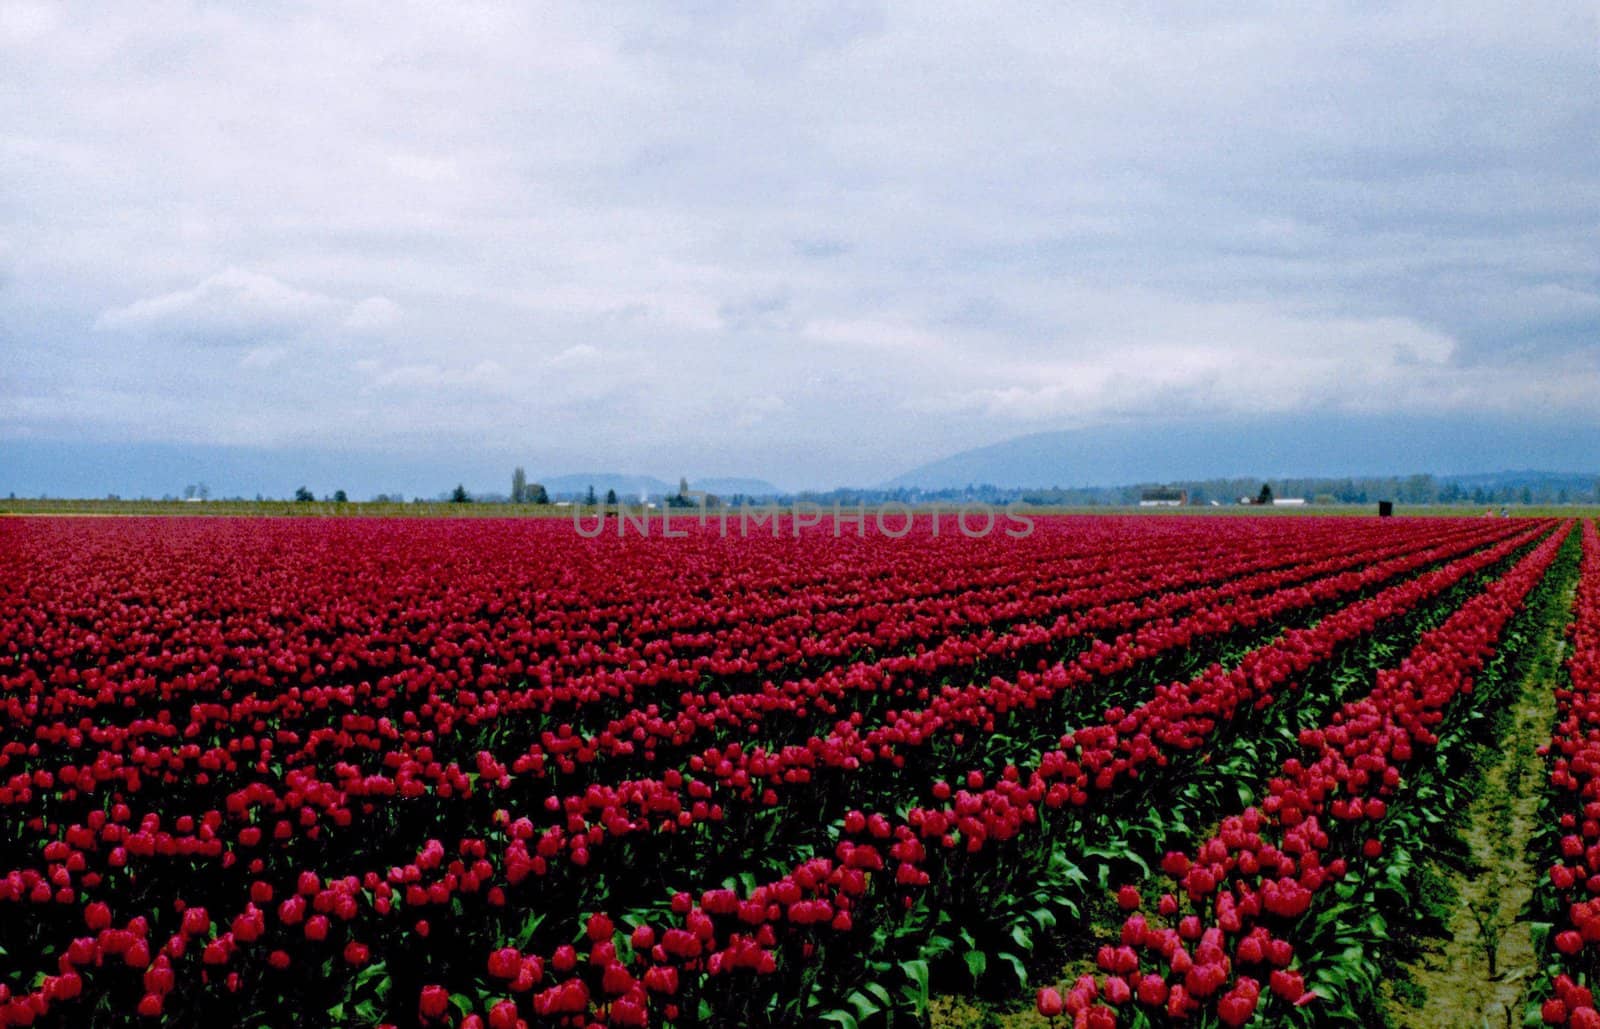 Rows and rows of red tulips shine in the morning mist in Washington state.